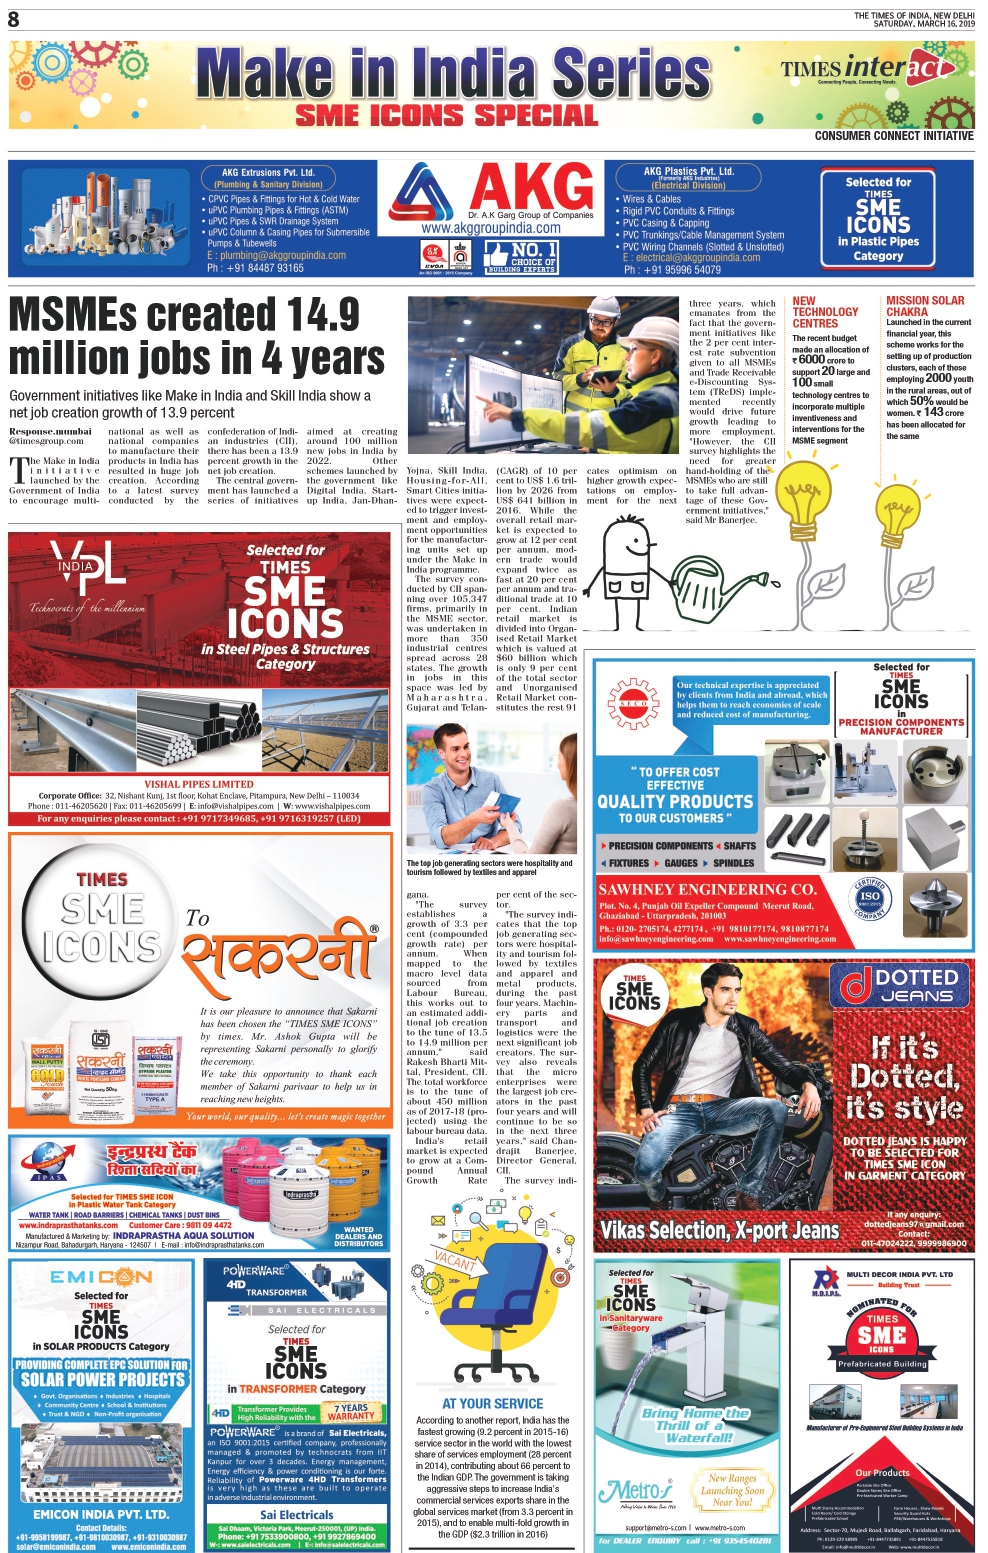 News_India Feature "Make In india" Series SME Icons 2019 | AKG Group